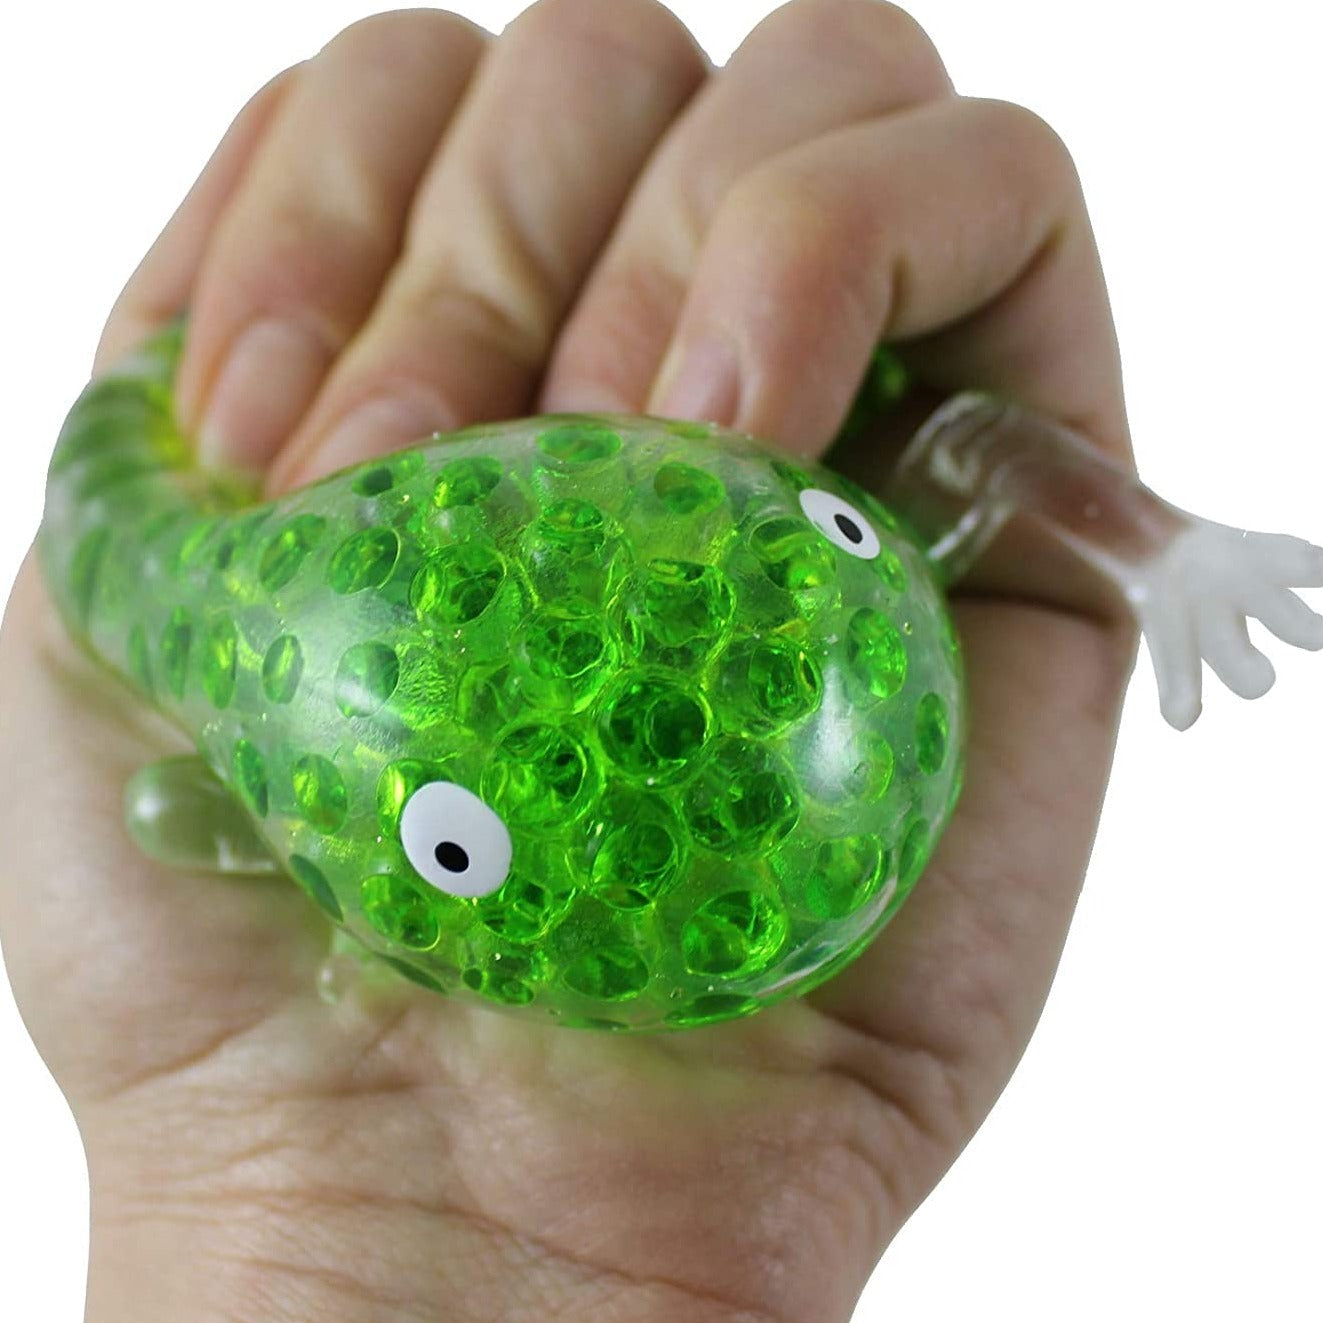 Squeezy Frog, Squeezy Frogs are perfect for kids who need a tactile outlet for their restlessness or stress. Just give the frog a squeeze and watch as the beads push out and around, making the ball bulge. It's a fun and satisfying way to release tension and stress. The Squeezy Frog is made of a flexible skin filled with thick gel balls, which makes it soft, pliable, and fun to manipulate with the hands. The skin is slightly sticky to the touch, providing a great sensory experience for kids. Squeezy Frogs ar